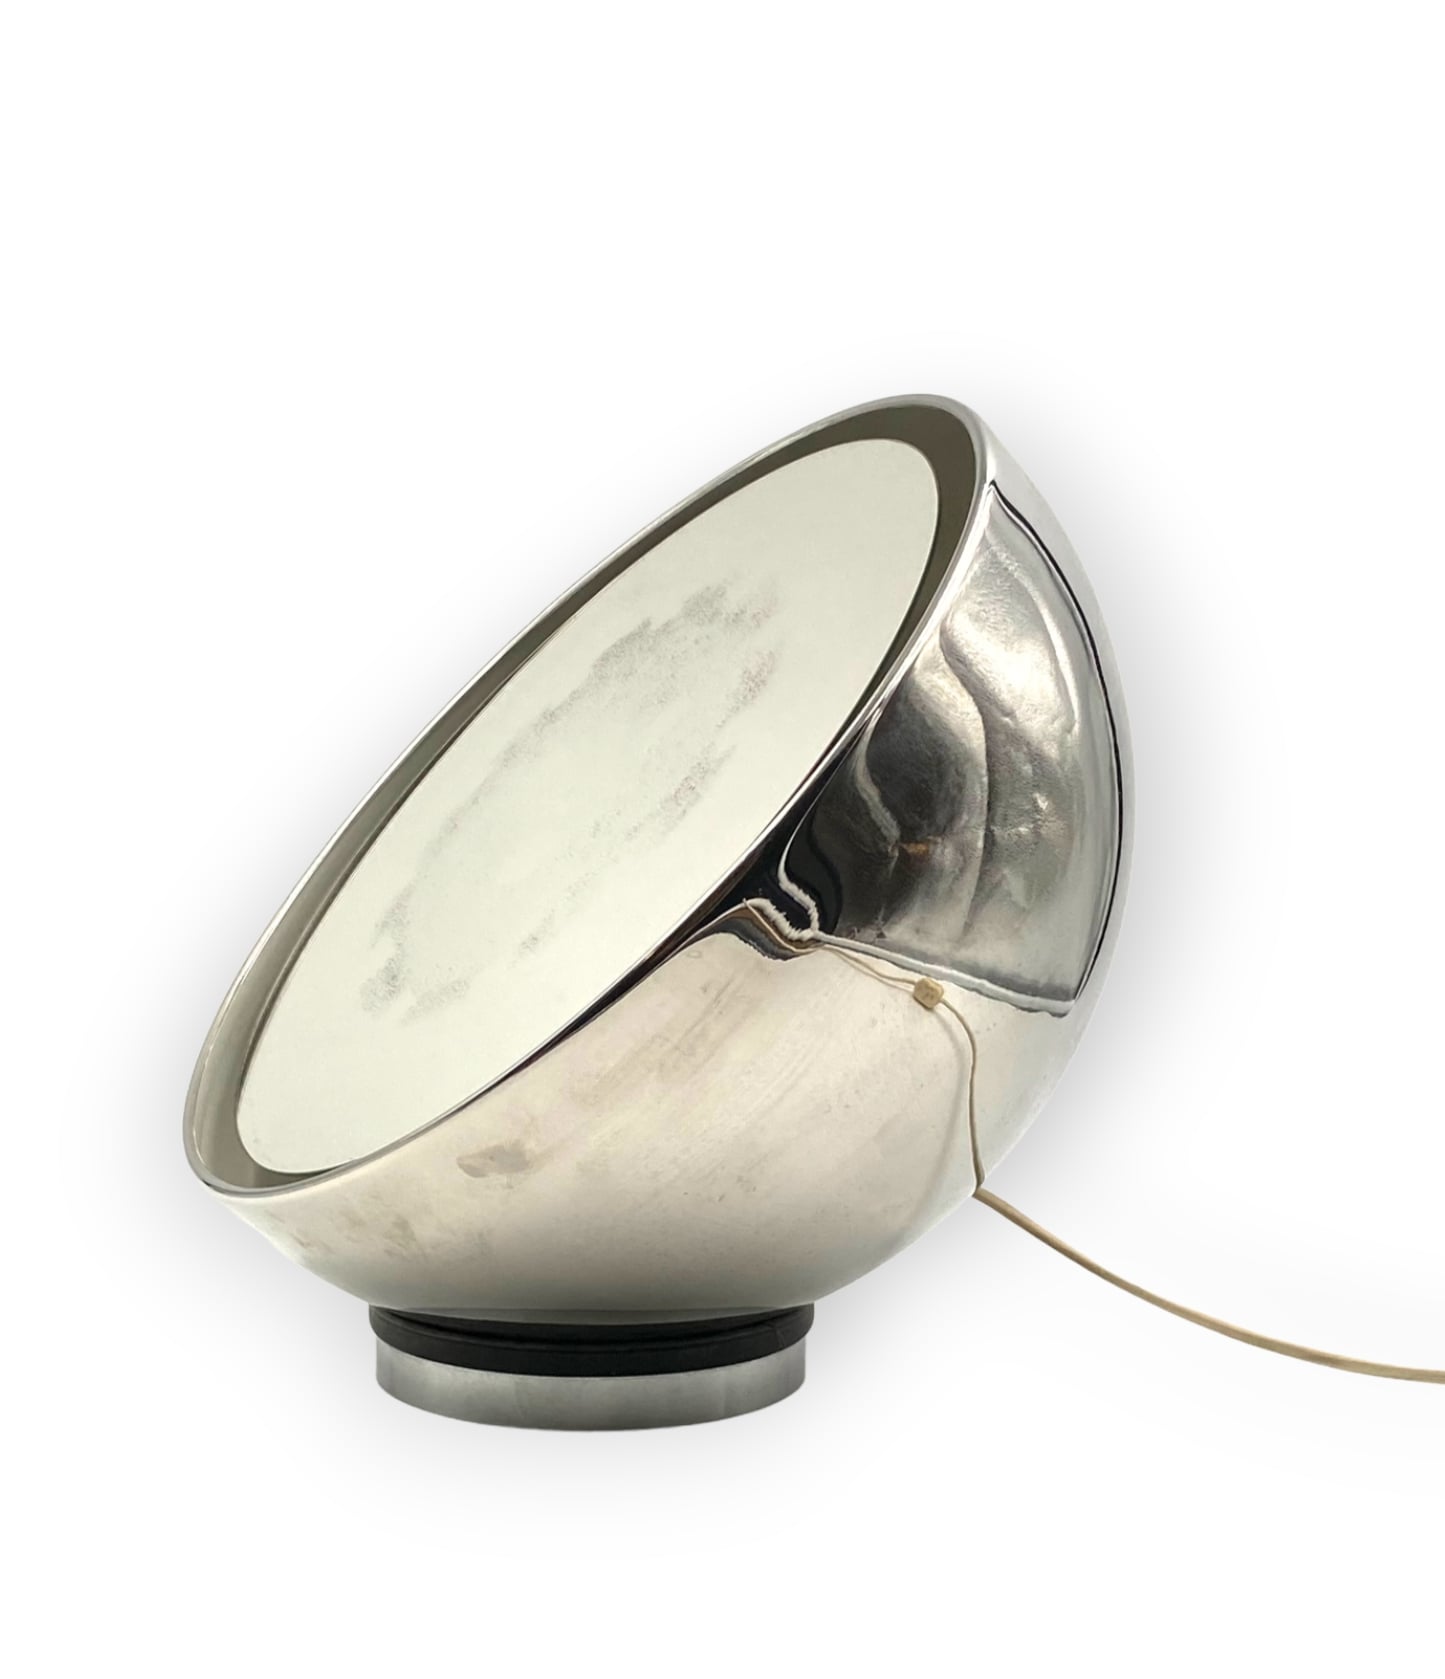 Mirror spherical table Lamp, Italy 1970s